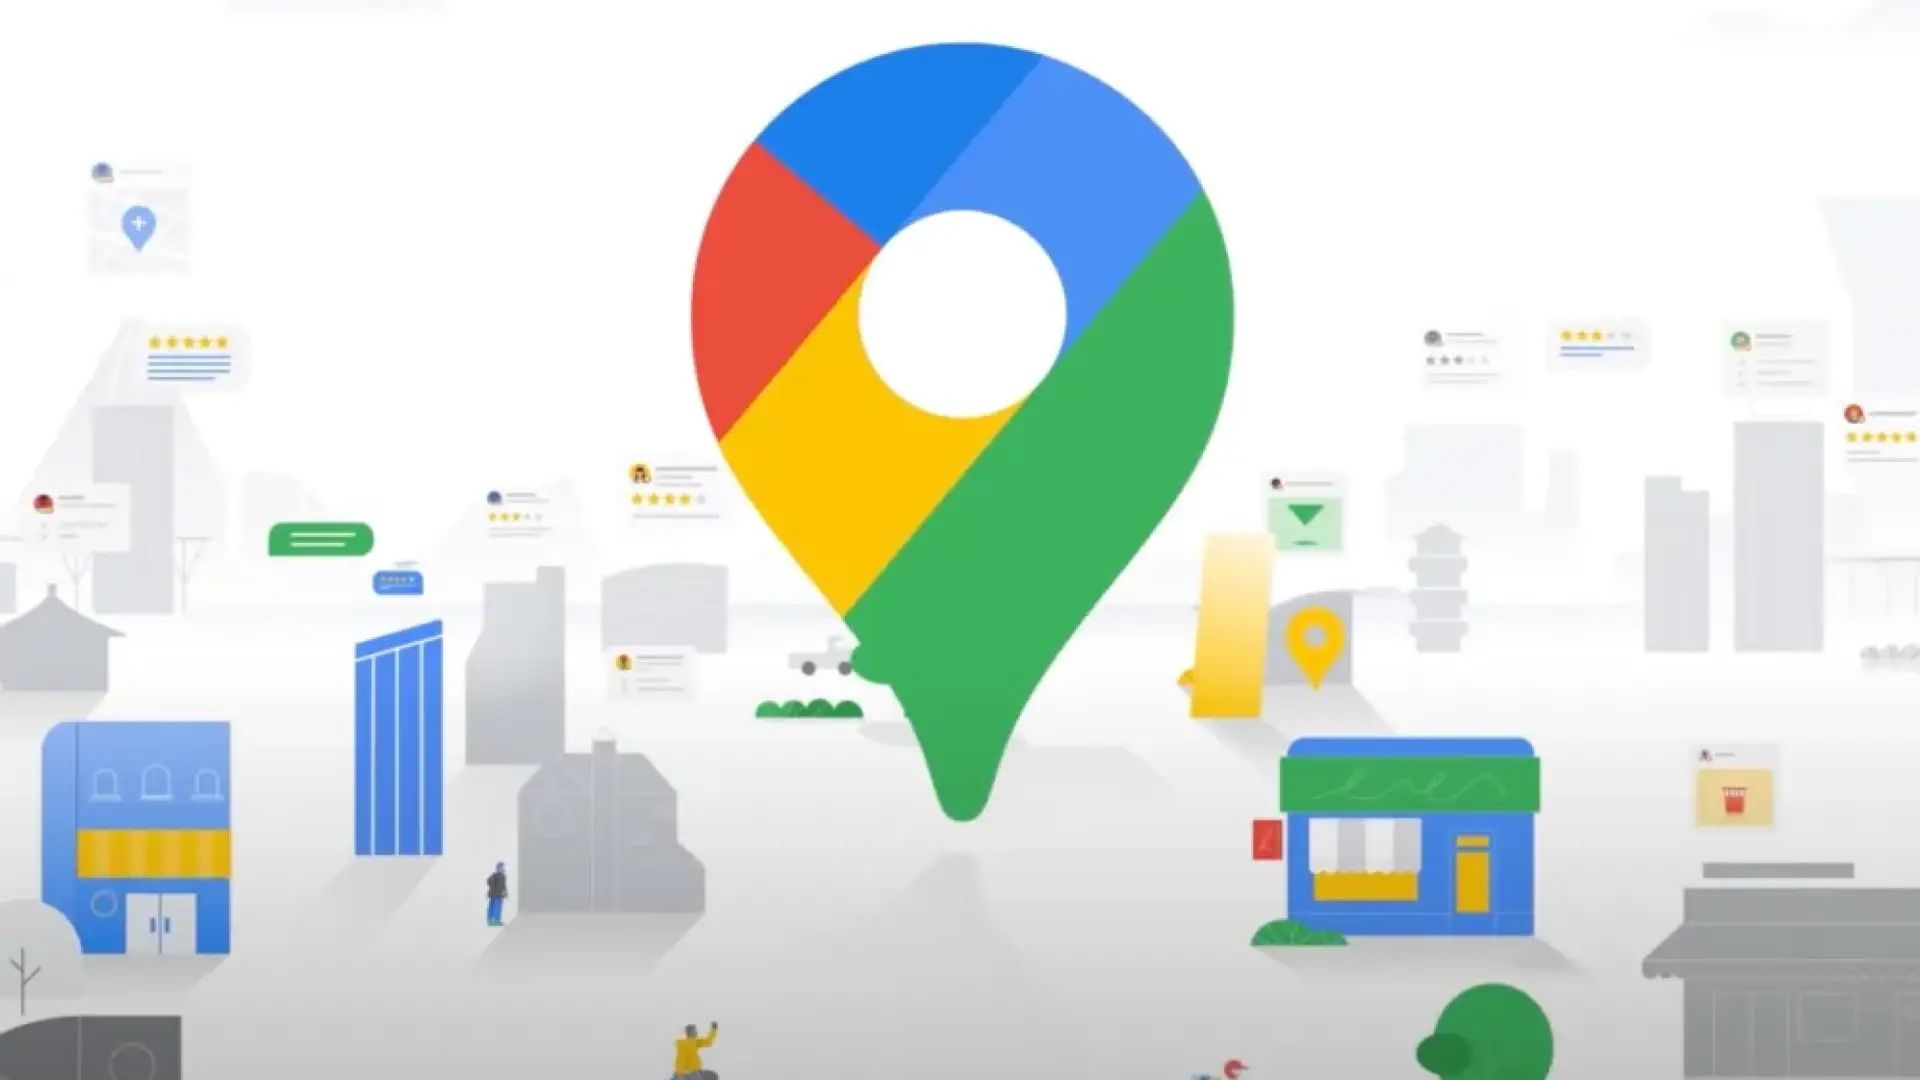 New Update!! Now You Can Share Your Live Location With Google Maps